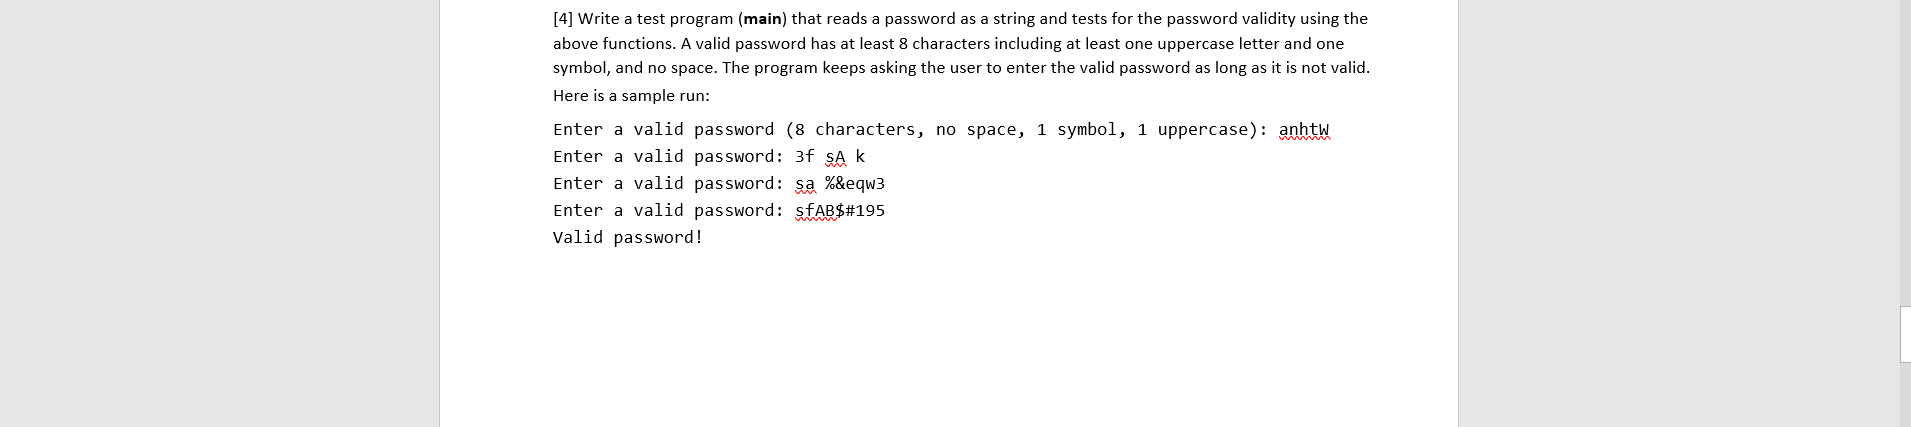 [4] Write a test program (main) that reads a password as a string and tests for the password validity using the
above functions. A valid password has at least 8 characters including at least one uppercase letter and one
symbol, and no space. The program keeps asking the user to enter the valid password as long as it is not valid.
Here is a sample run:
Enter a valid password (8 characters, no space, 1 symbol, 1 uppercase): anhtW
Enter a valid password: 3f SA k
Enter a valid password: sa %&eqw3
Enter a valid password: sfAB$#195
Valid password!
